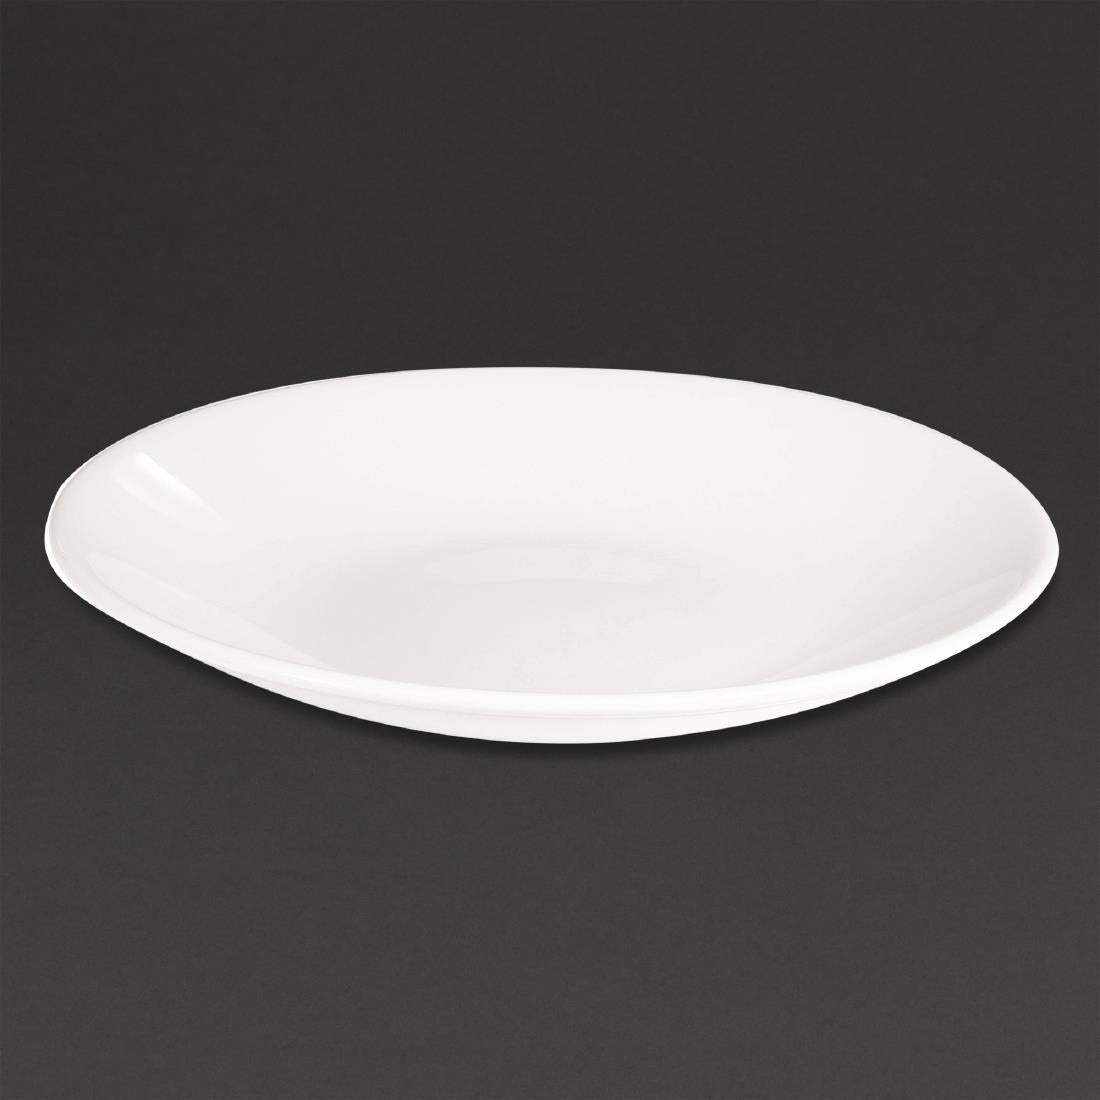 DA738 Churchill Profile Deep Coupe Plates 225mm (Pack of 12) JD Catering Equipment Solutions Ltd